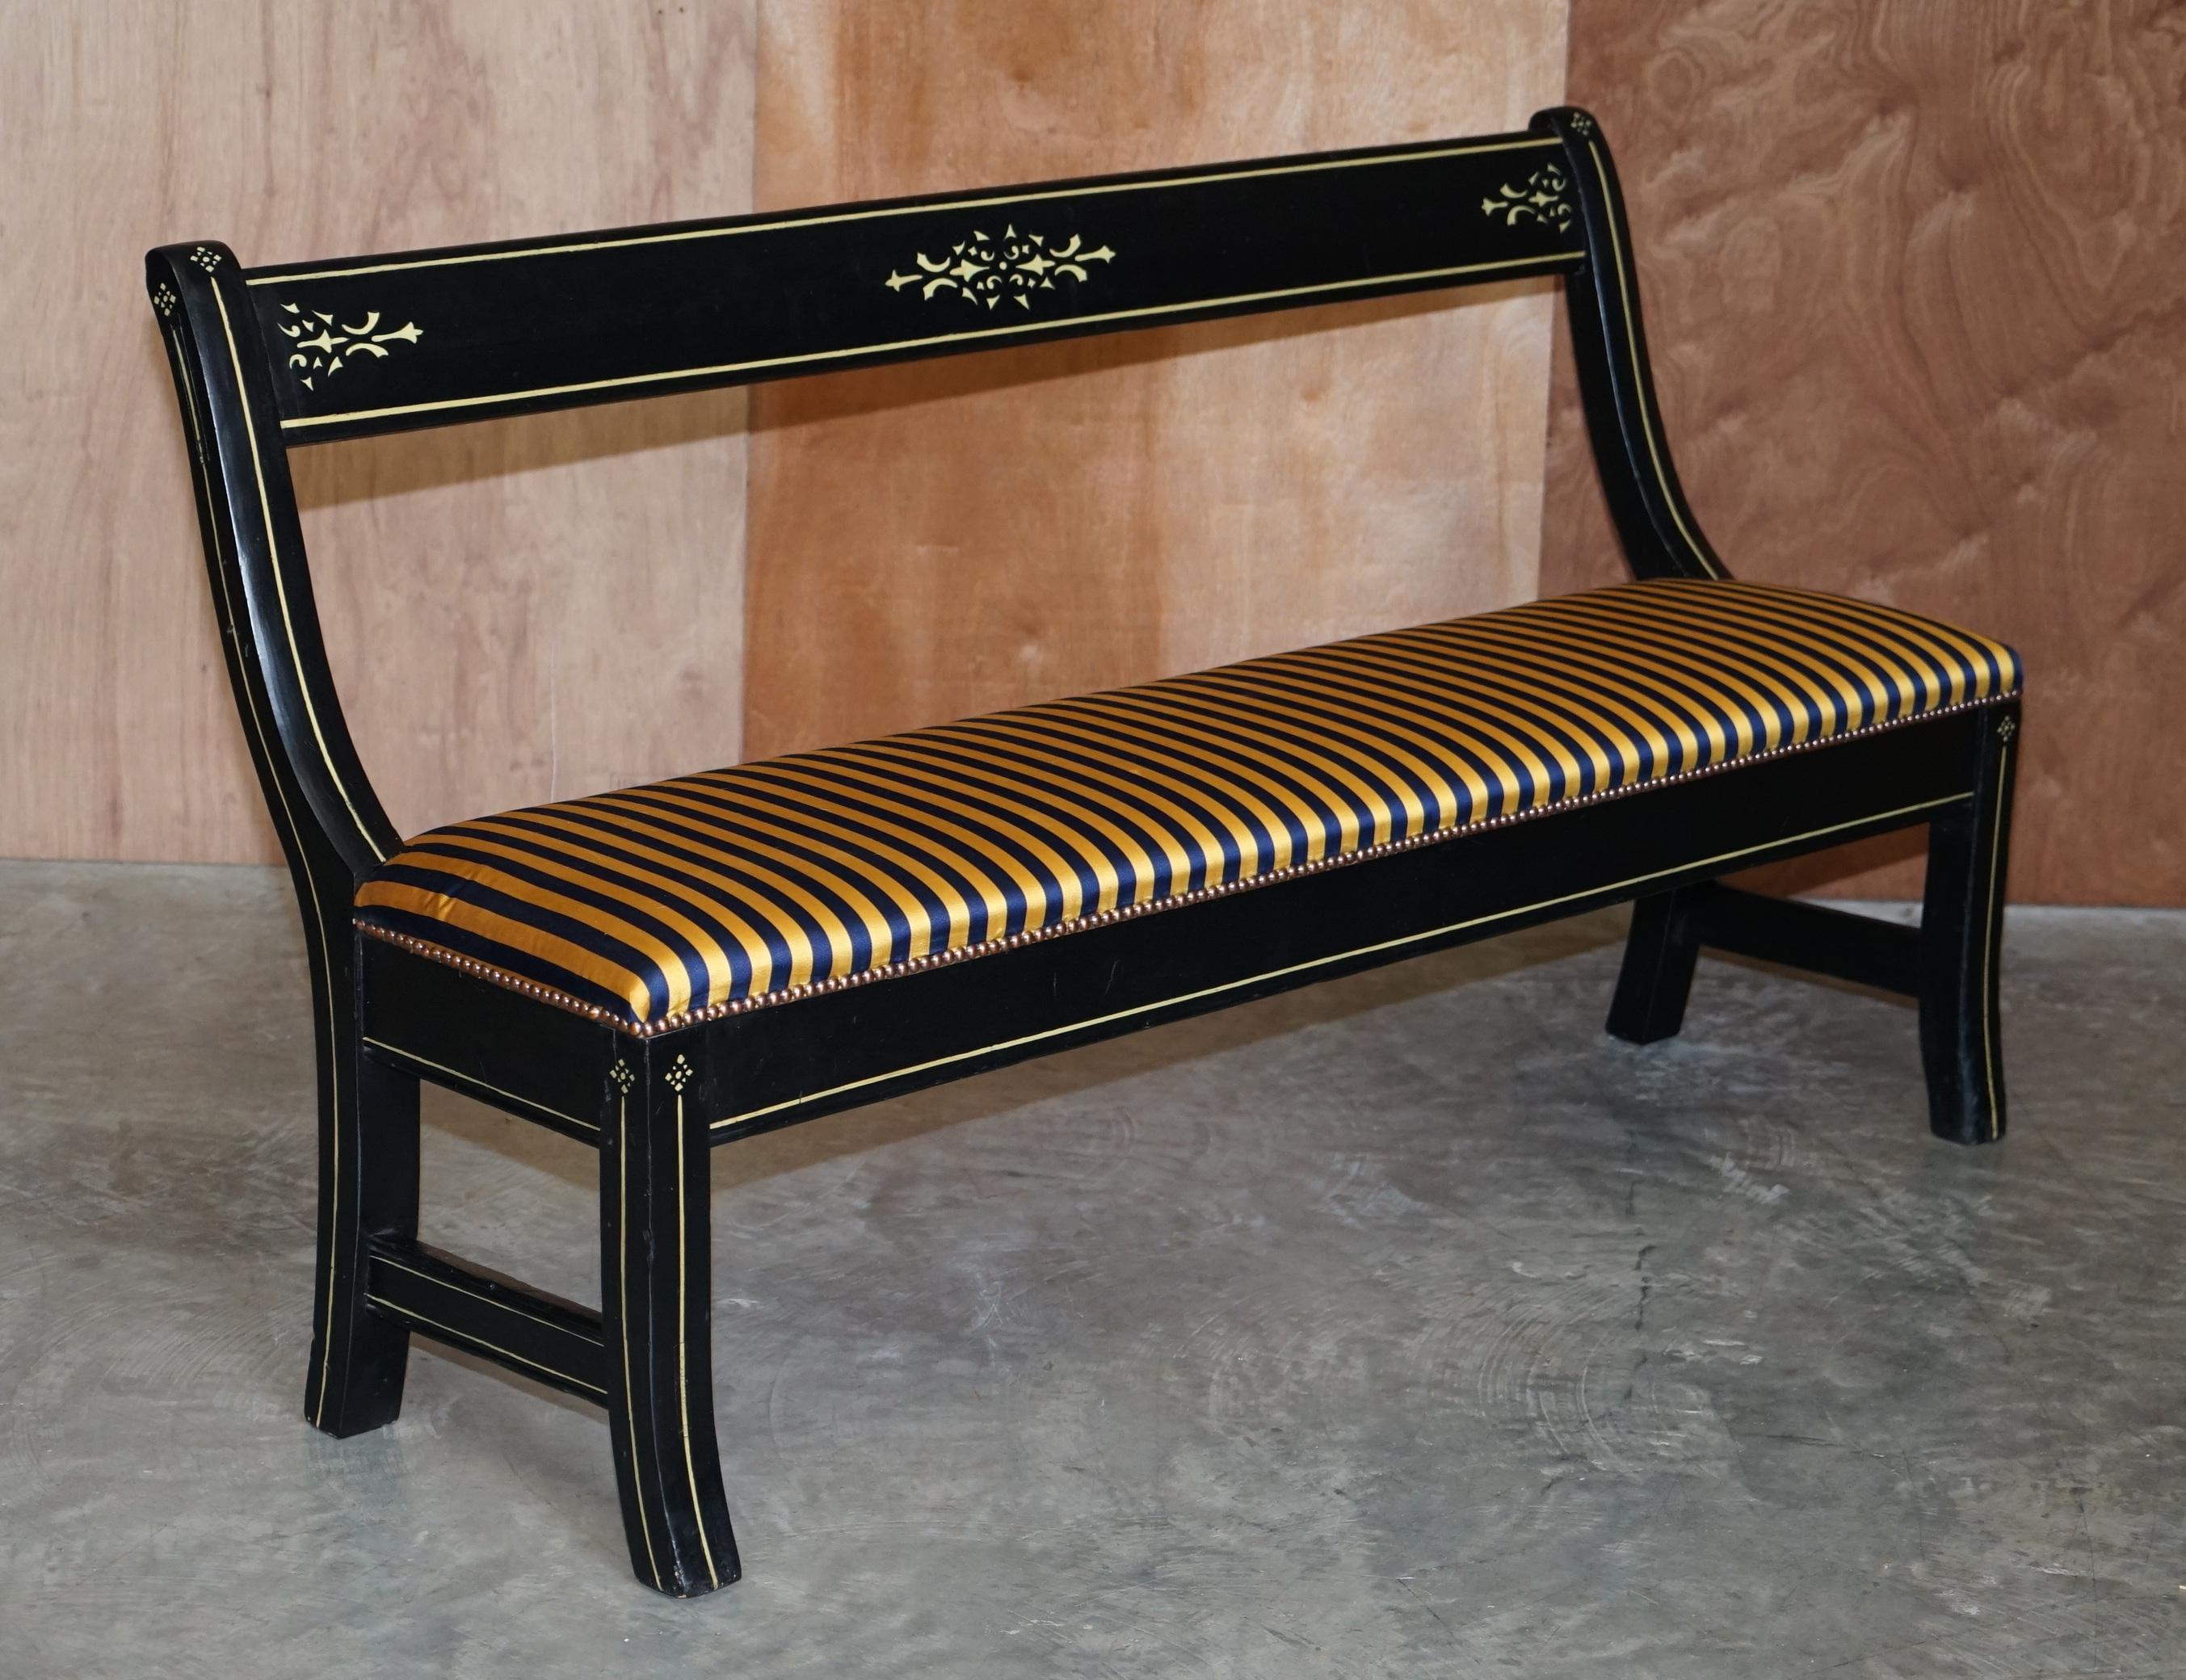 We are delighted to offer this stunning original pair of fully restored, Regency circa 1810-1820 hall seat benches with ebonised frames 

A very decorative and good looking pair, these have been fully restored to include new upholstery and fresh